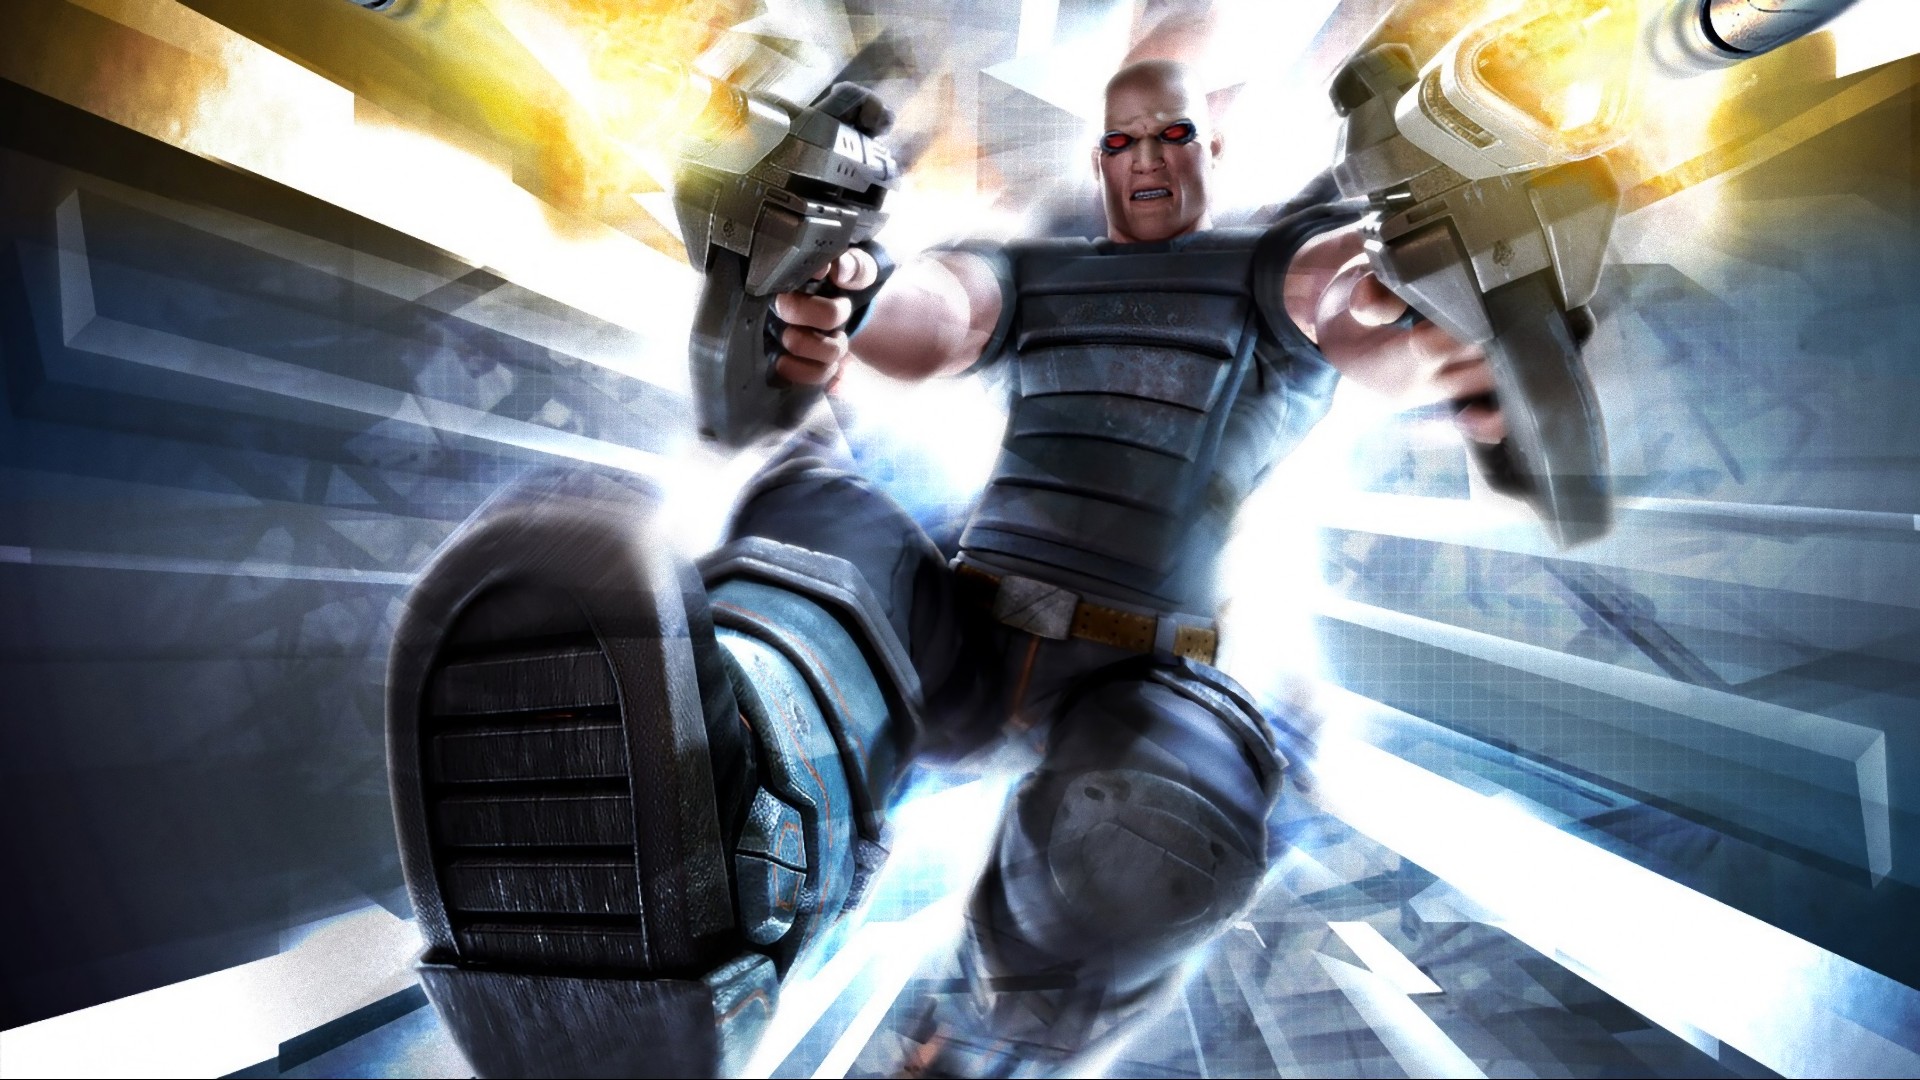 Incredible Graphics and Action in Timesplitters 2 Remake Gameplay Footage